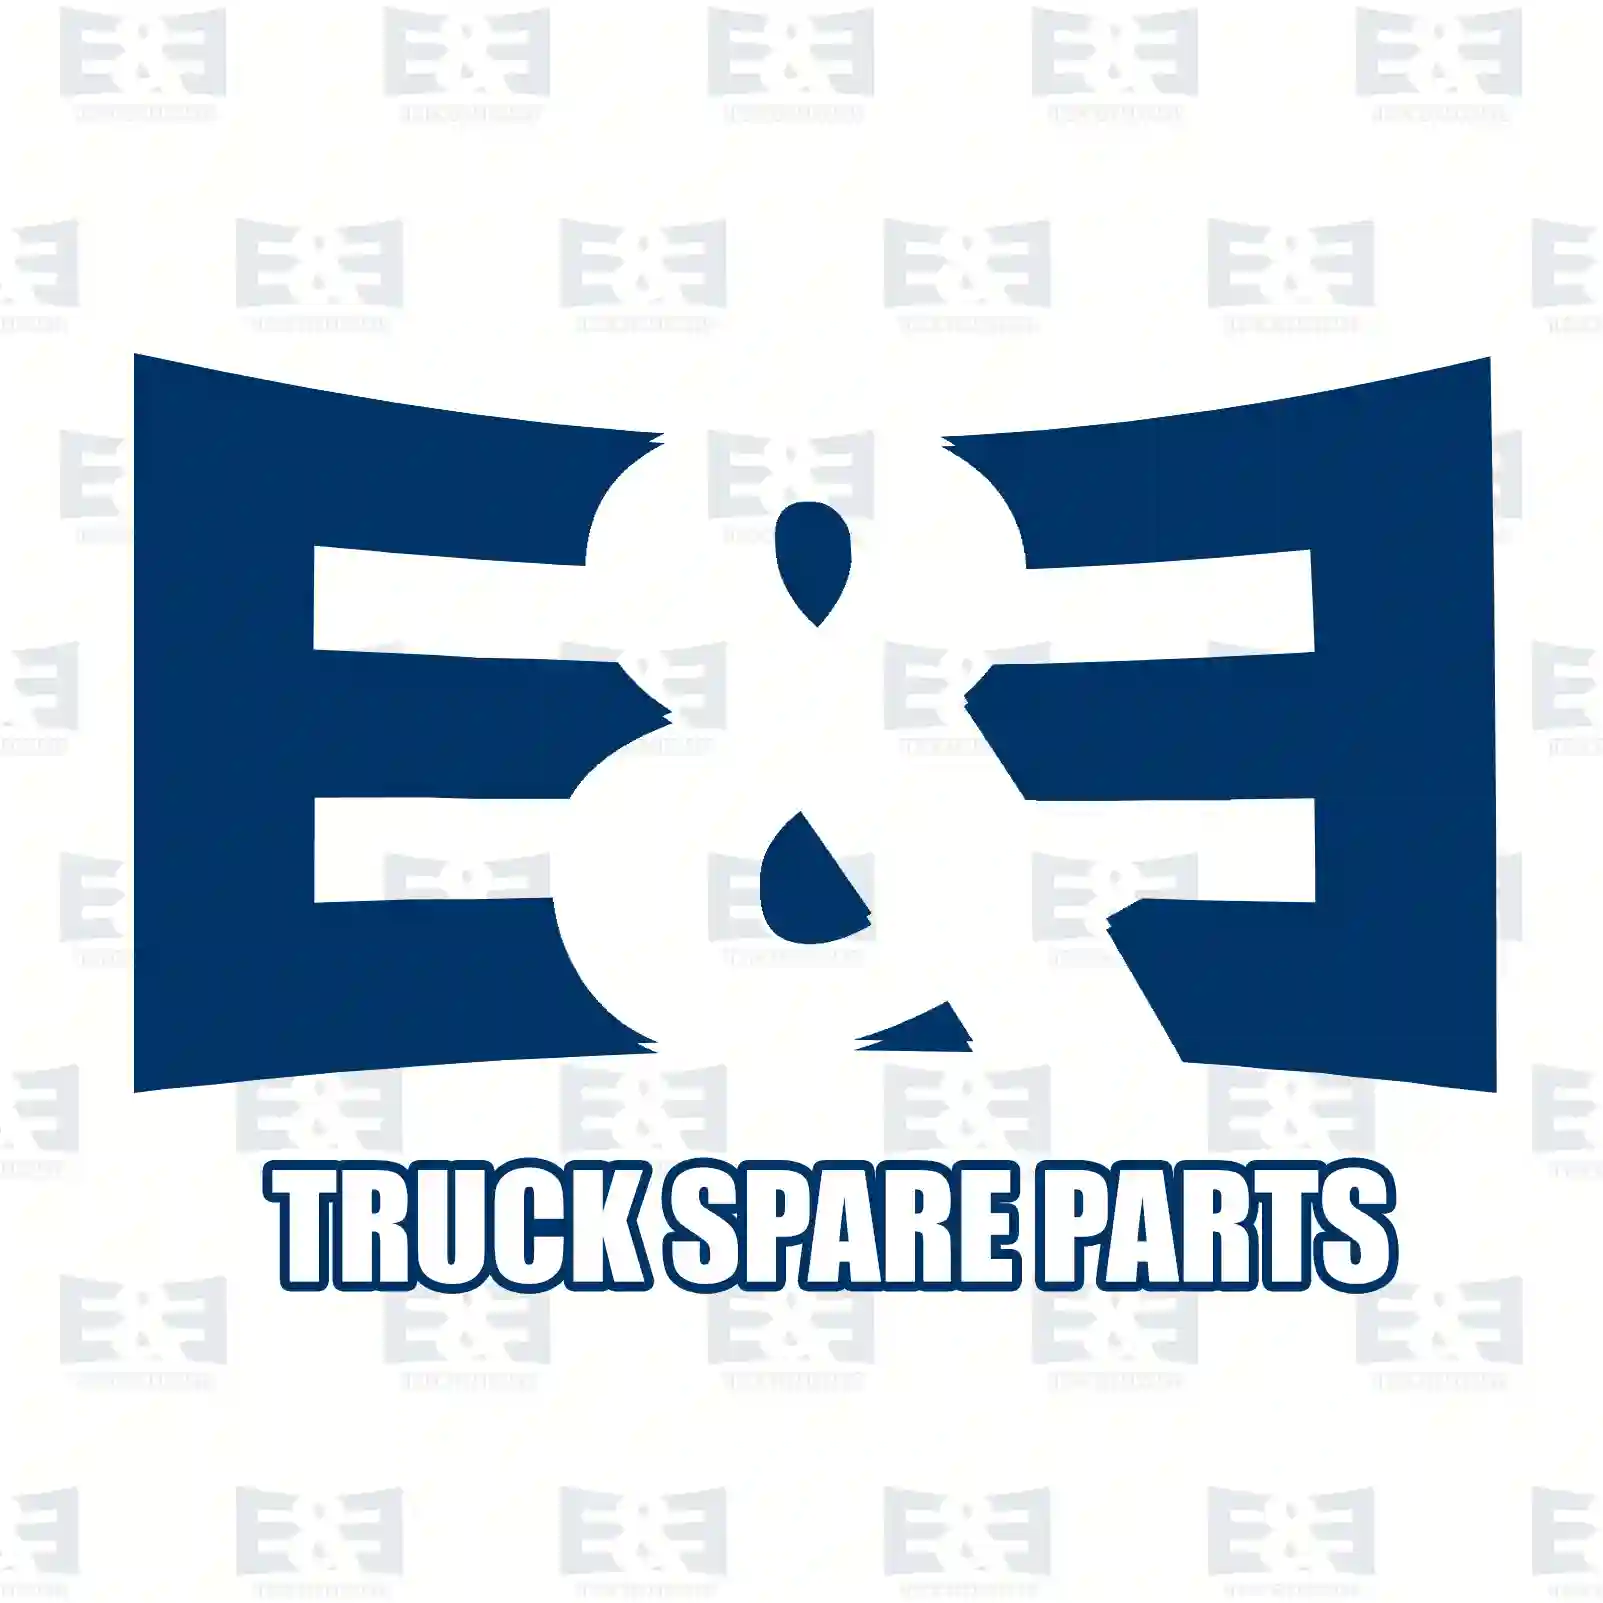  Switching device, gear shift lever || E&E Truck Spare Parts | Truck Spare Parts, Auotomotive Spare Parts